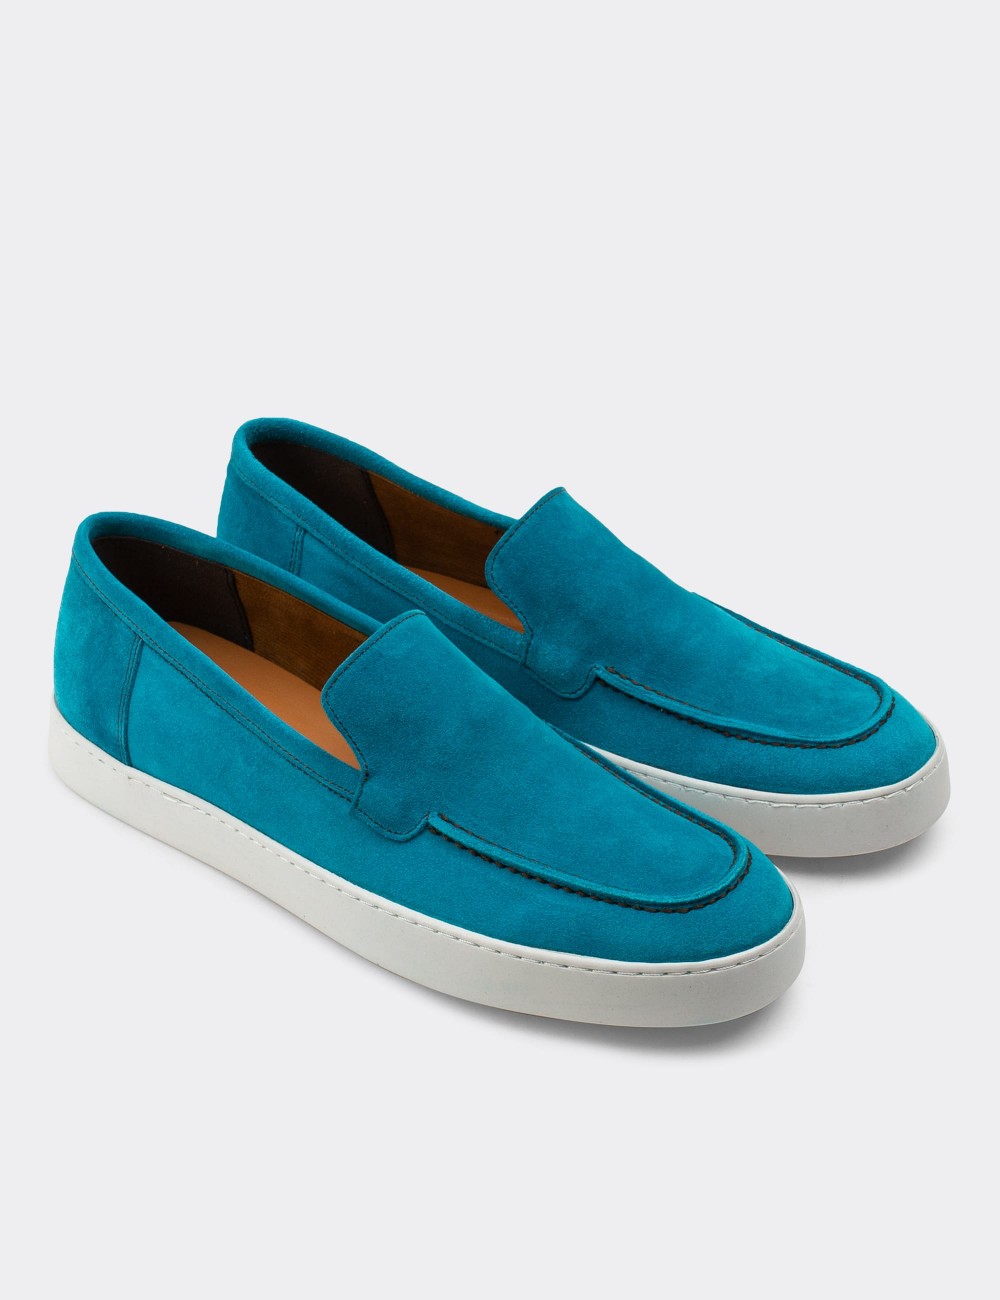 Turquoise Suede Leather Loafers - 01865MTRKC01